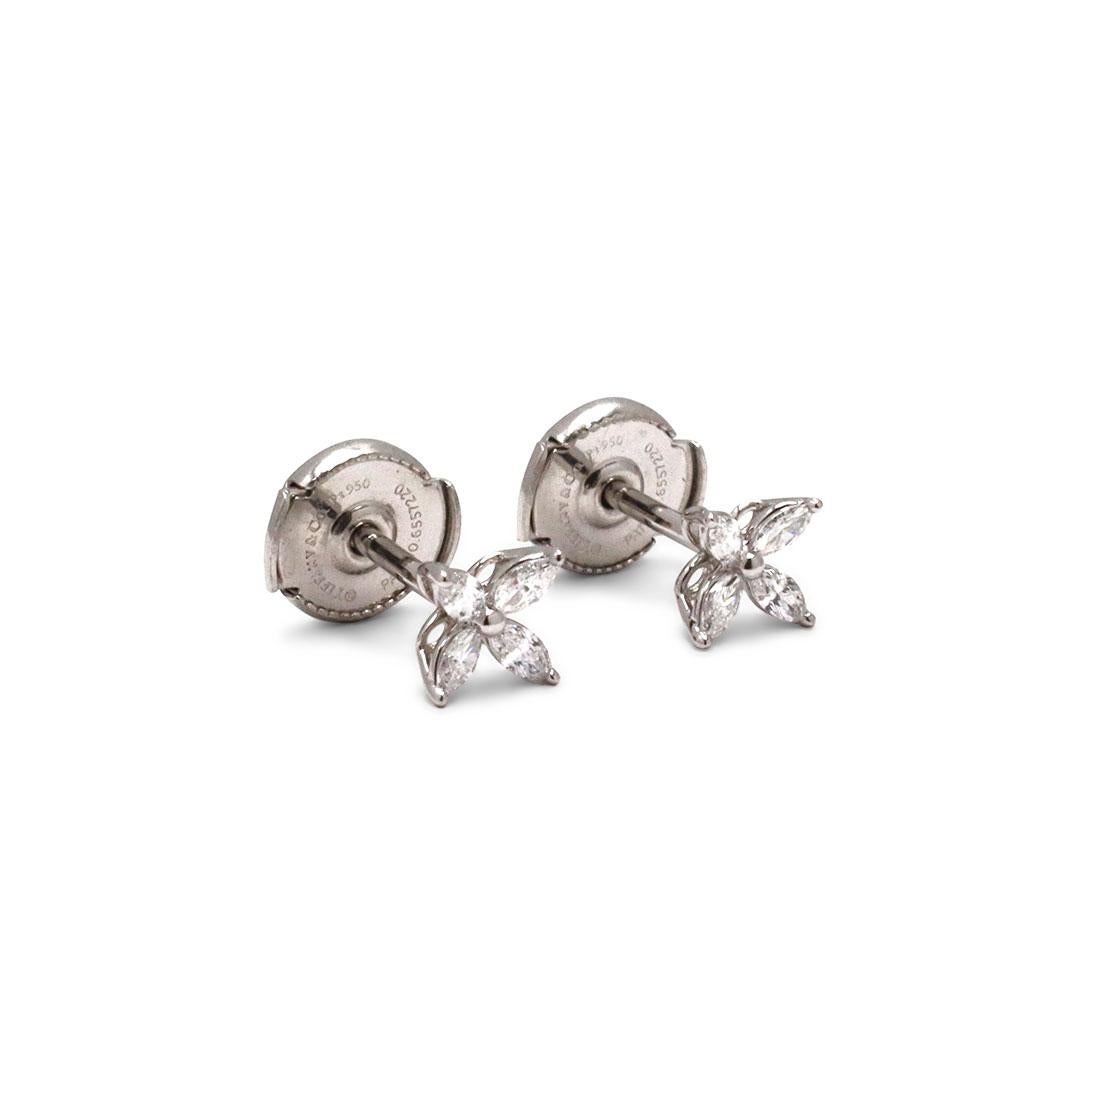 Authentic classic Tiffany & Co. 'Victoria' earrings crafted in platinum and set with an estimated 0.19 carats total weight of radiant marquise-cut diamonds (E-F, VS). Signed Tiffany & Co., PT 950. The earrings are presented with the original box, no